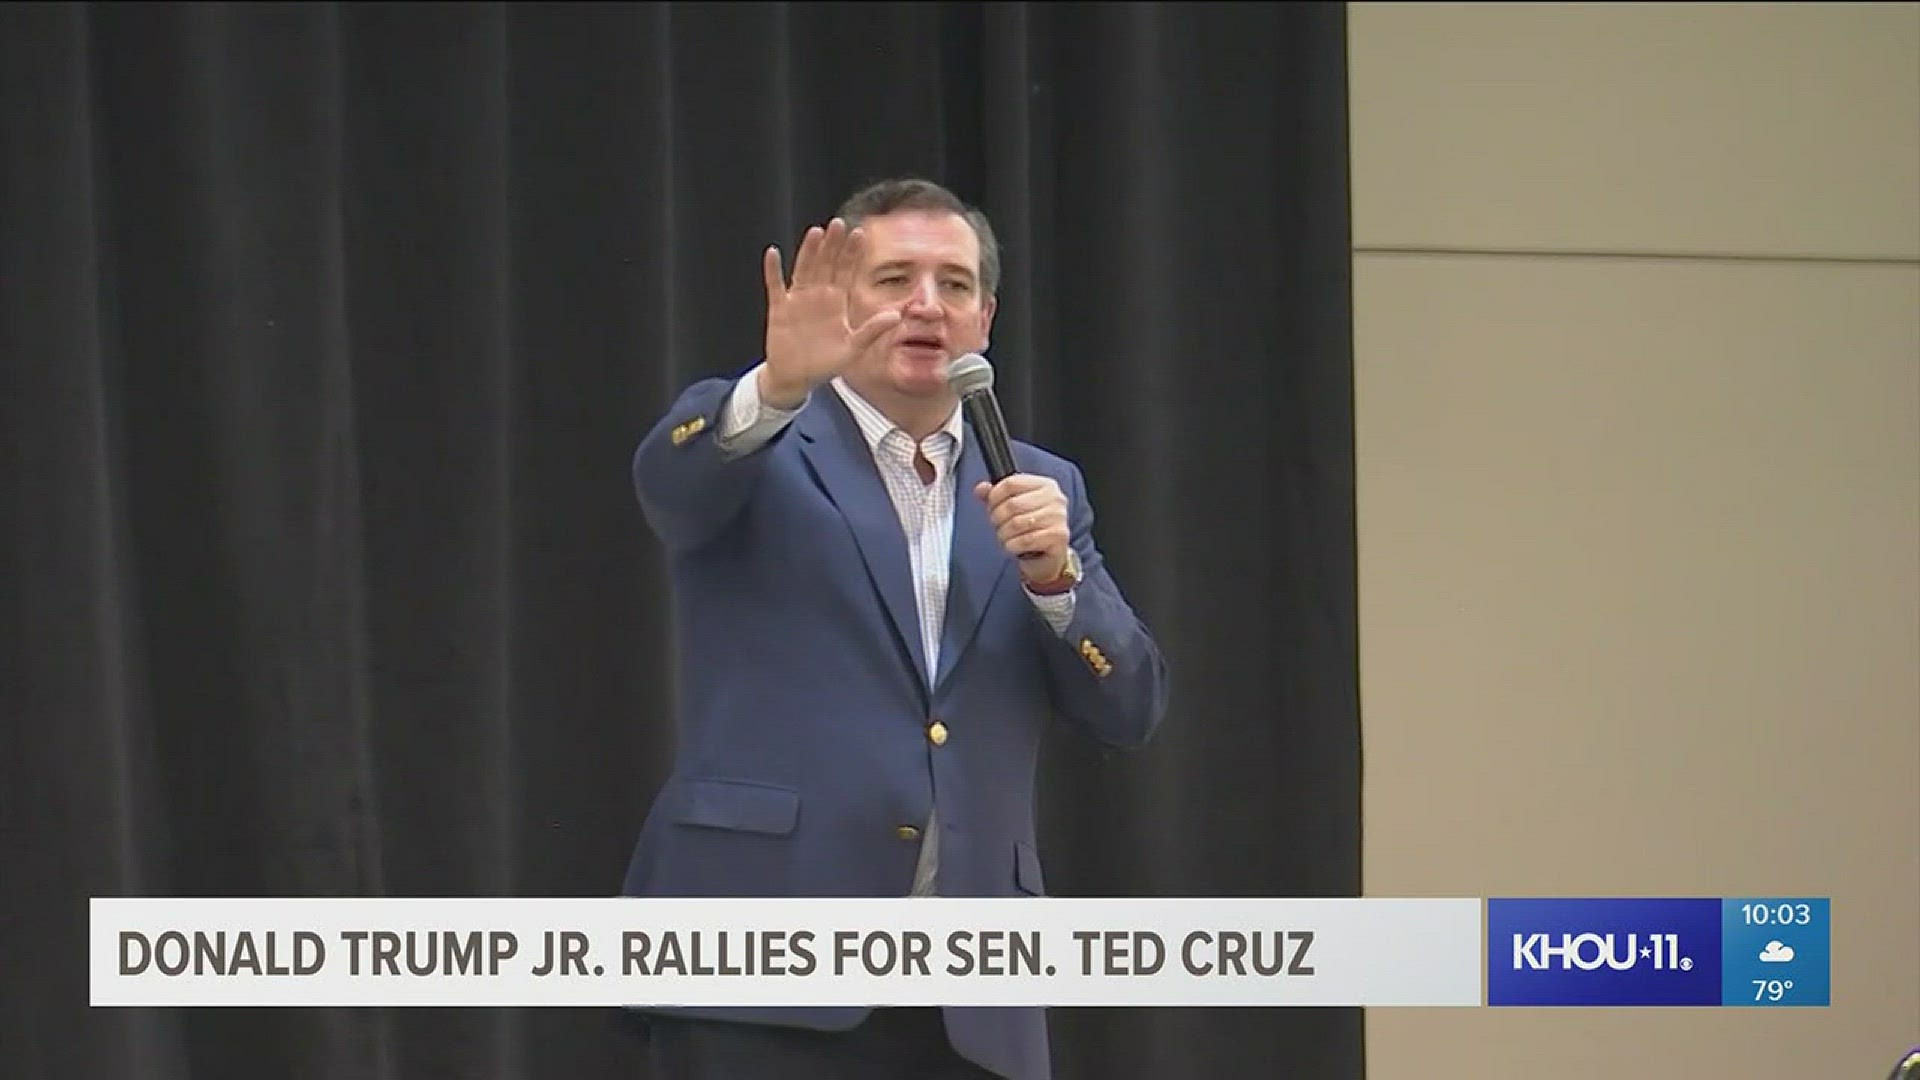 Sen. Ted Cruz was in Conroe Wednesday night with a special guest - Donald Trump Jr.